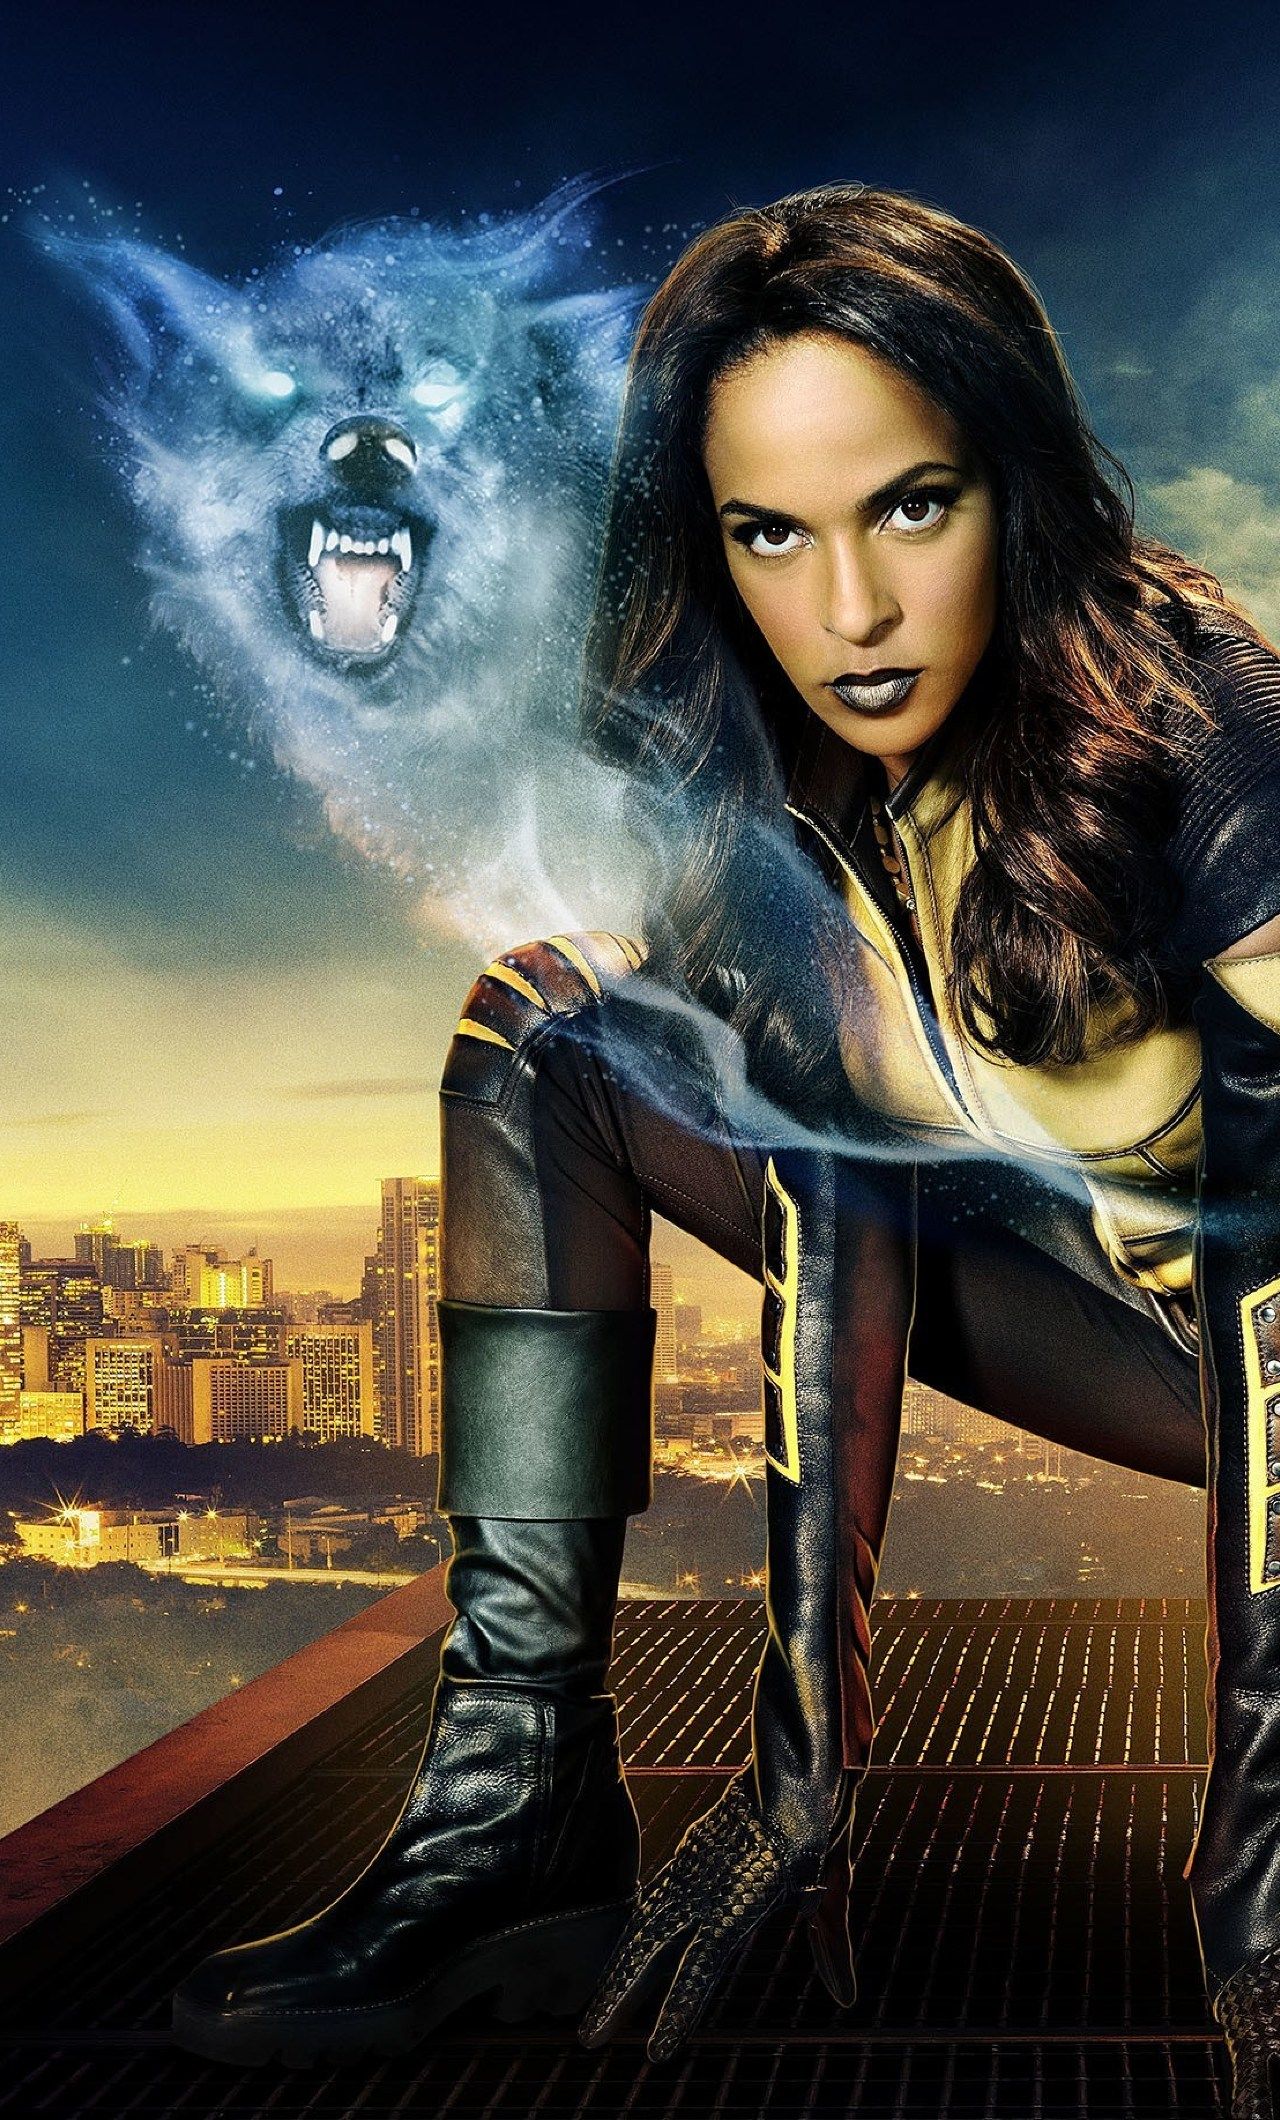 Vixen From DC's Legends Of Tomorrow iPhone 6 plus Wallpaper, HD TV Series 4K Wallpaper, Image, Photo and Background